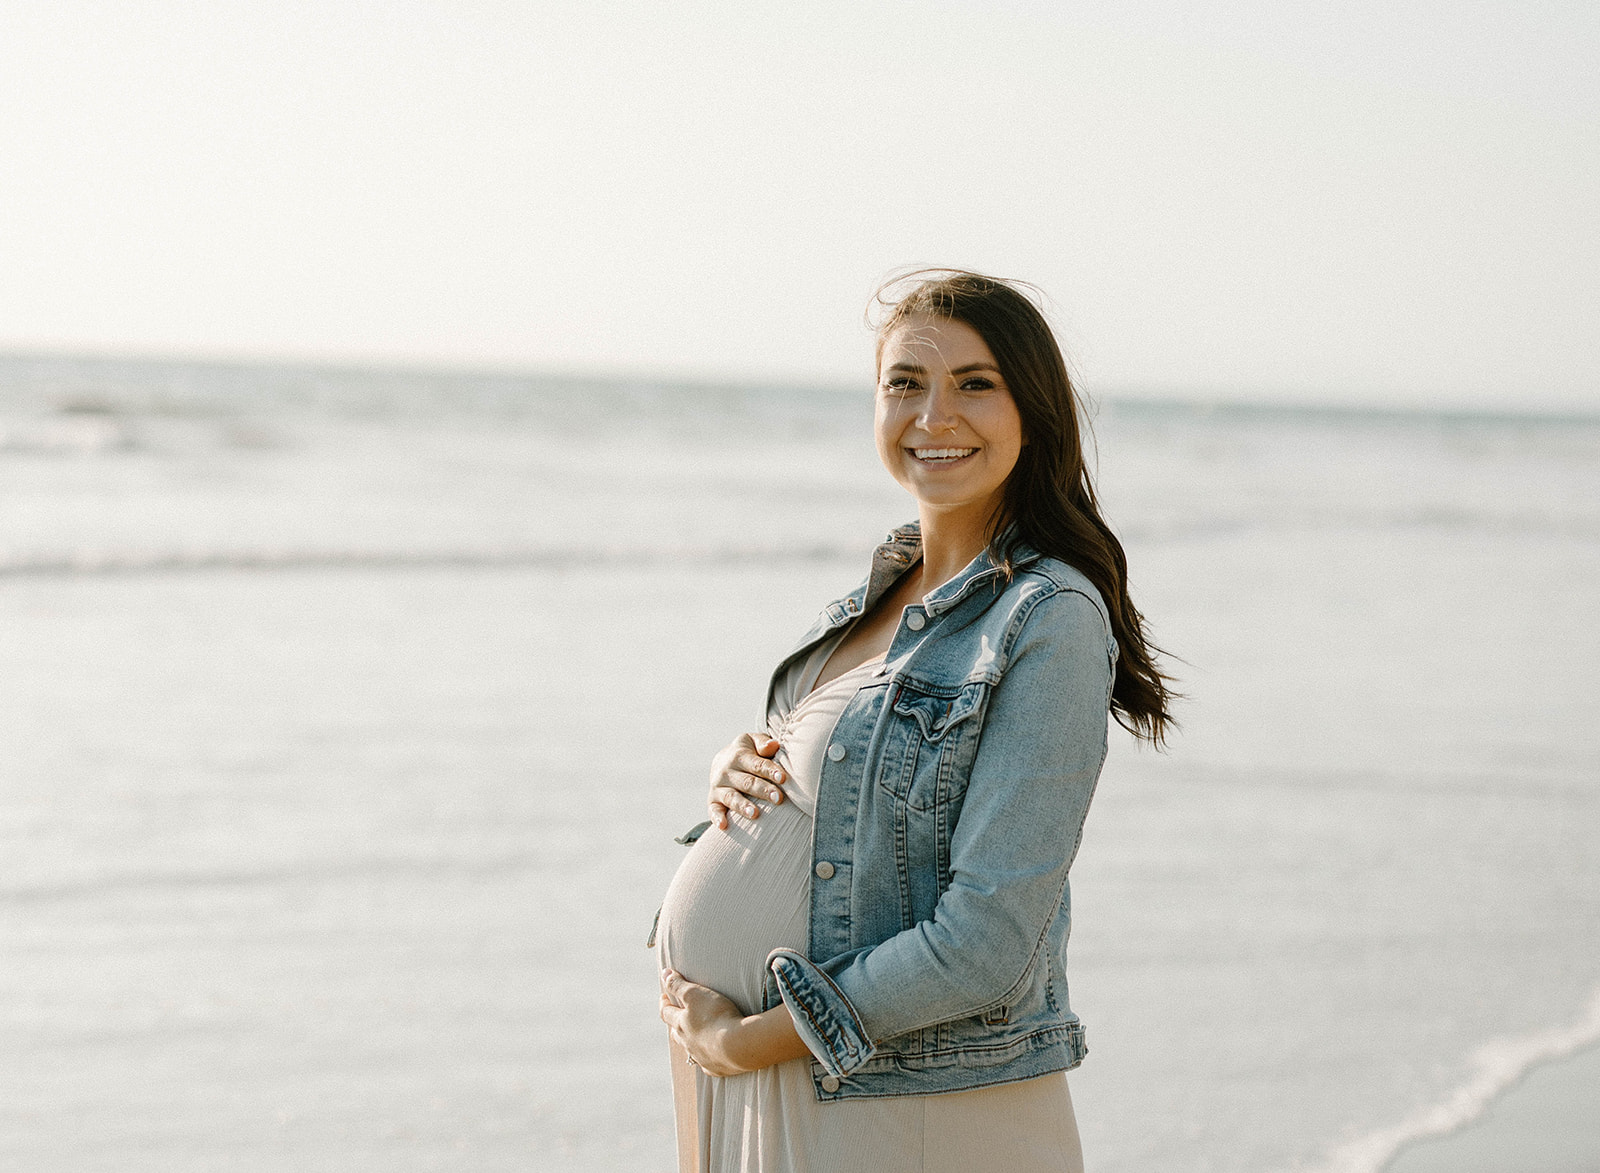 Maternity photos at the beach for a couple in San Diego California